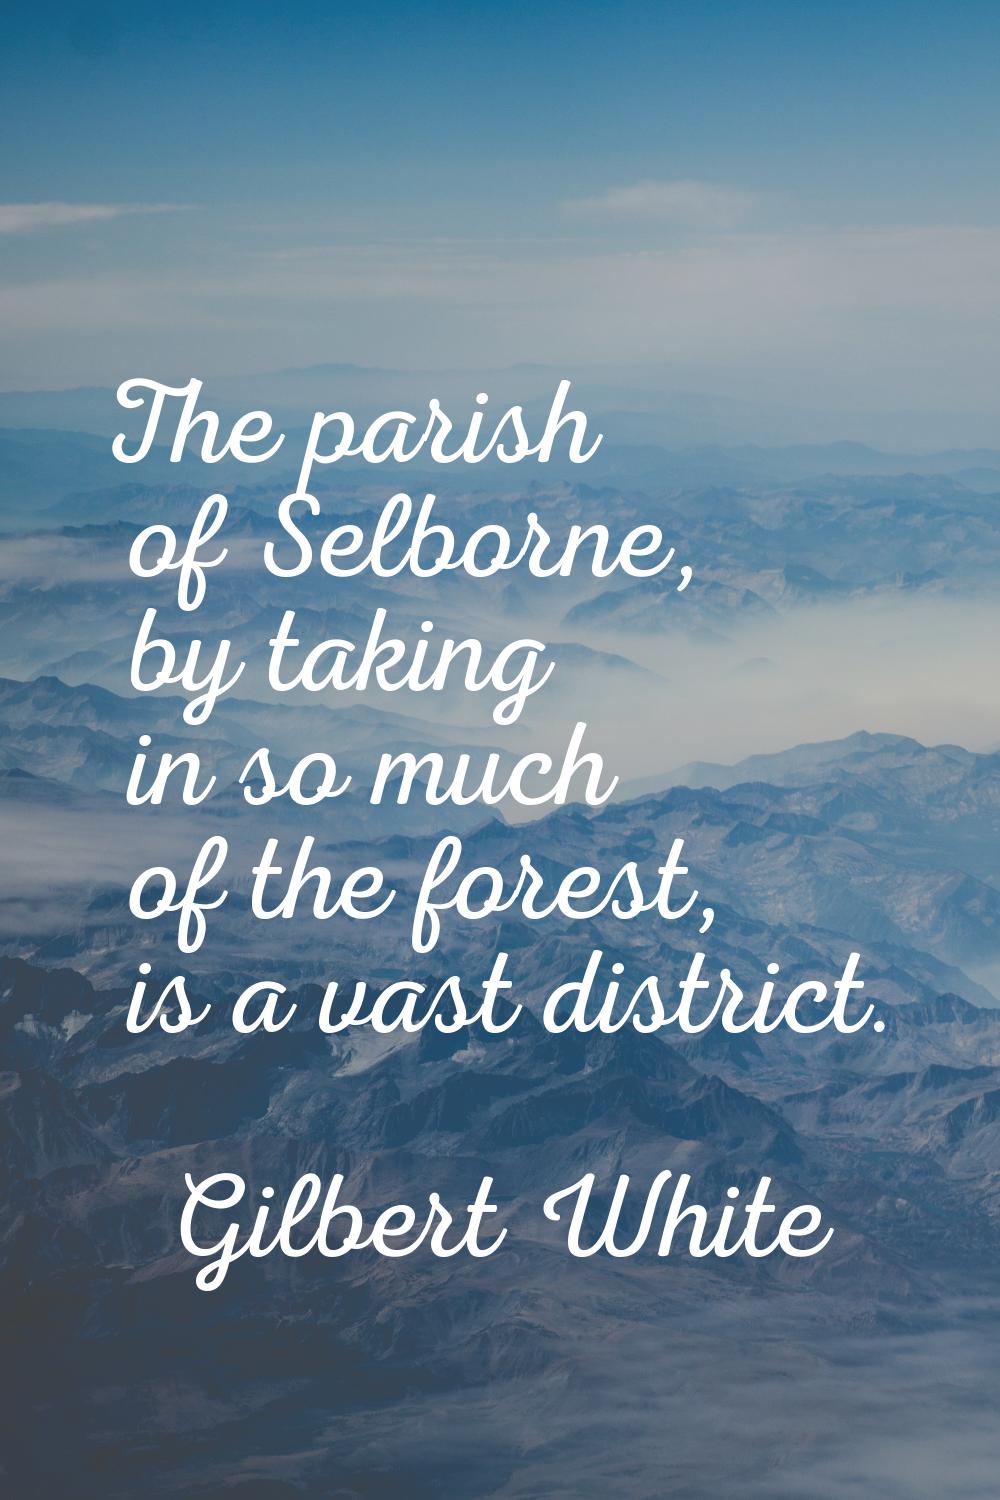 The parish of Selborne, by taking in so much of the forest, is a vast district.